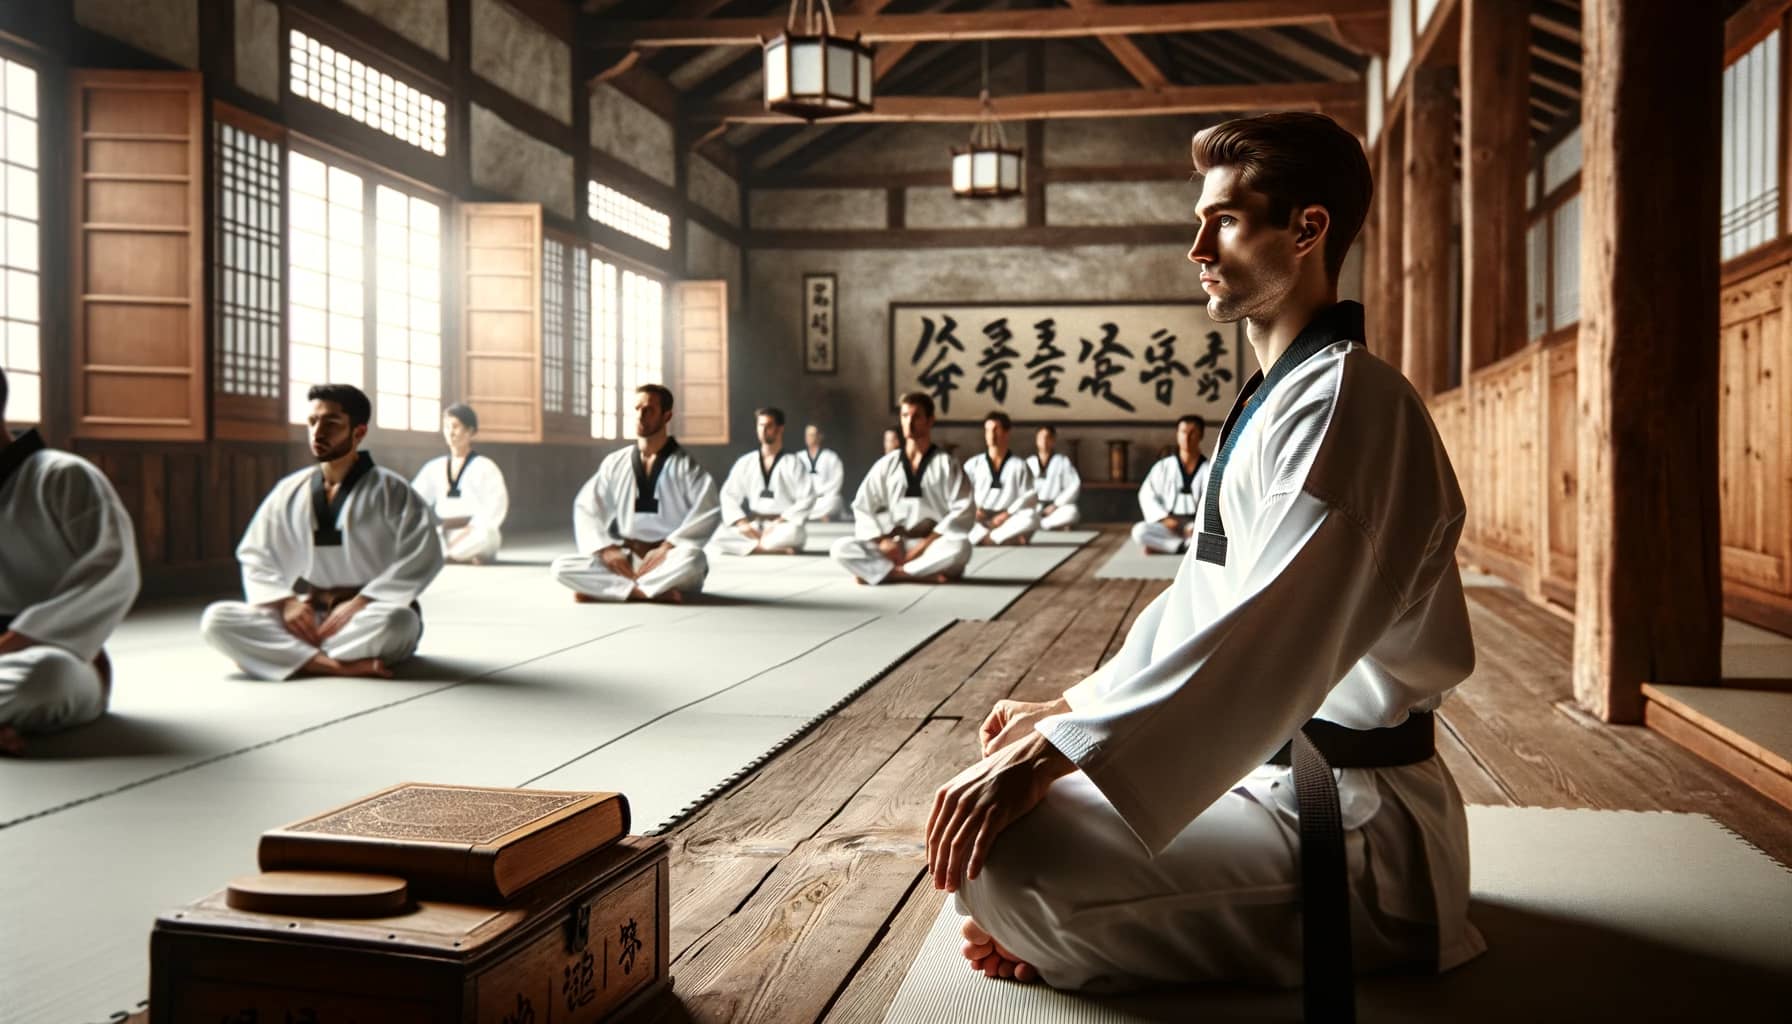 Inspiring image reflecting the essence of traditional martial arts training at Taekwondo4Fitness, with practitioners demonstrating discipline and technique in a setting that honors the cultural heritage and values of Taekwondo.